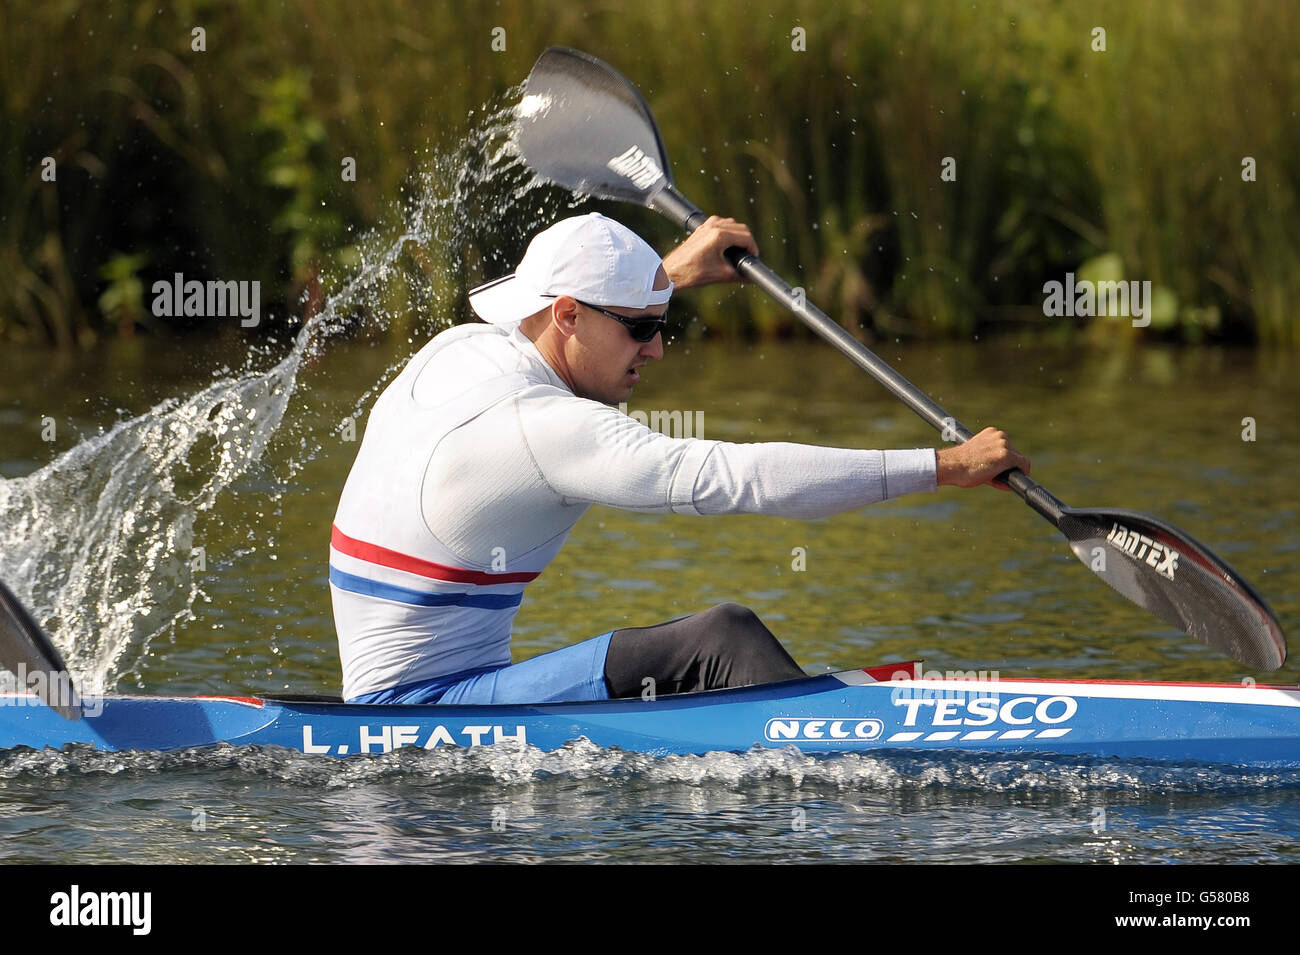 Canoe Sprint Team GB member Liam Heath, who will compete in the K2 200m during the Team GB Canoe Sprint announcement at Eton College Rowing Centre, Windsor. Stock Photo